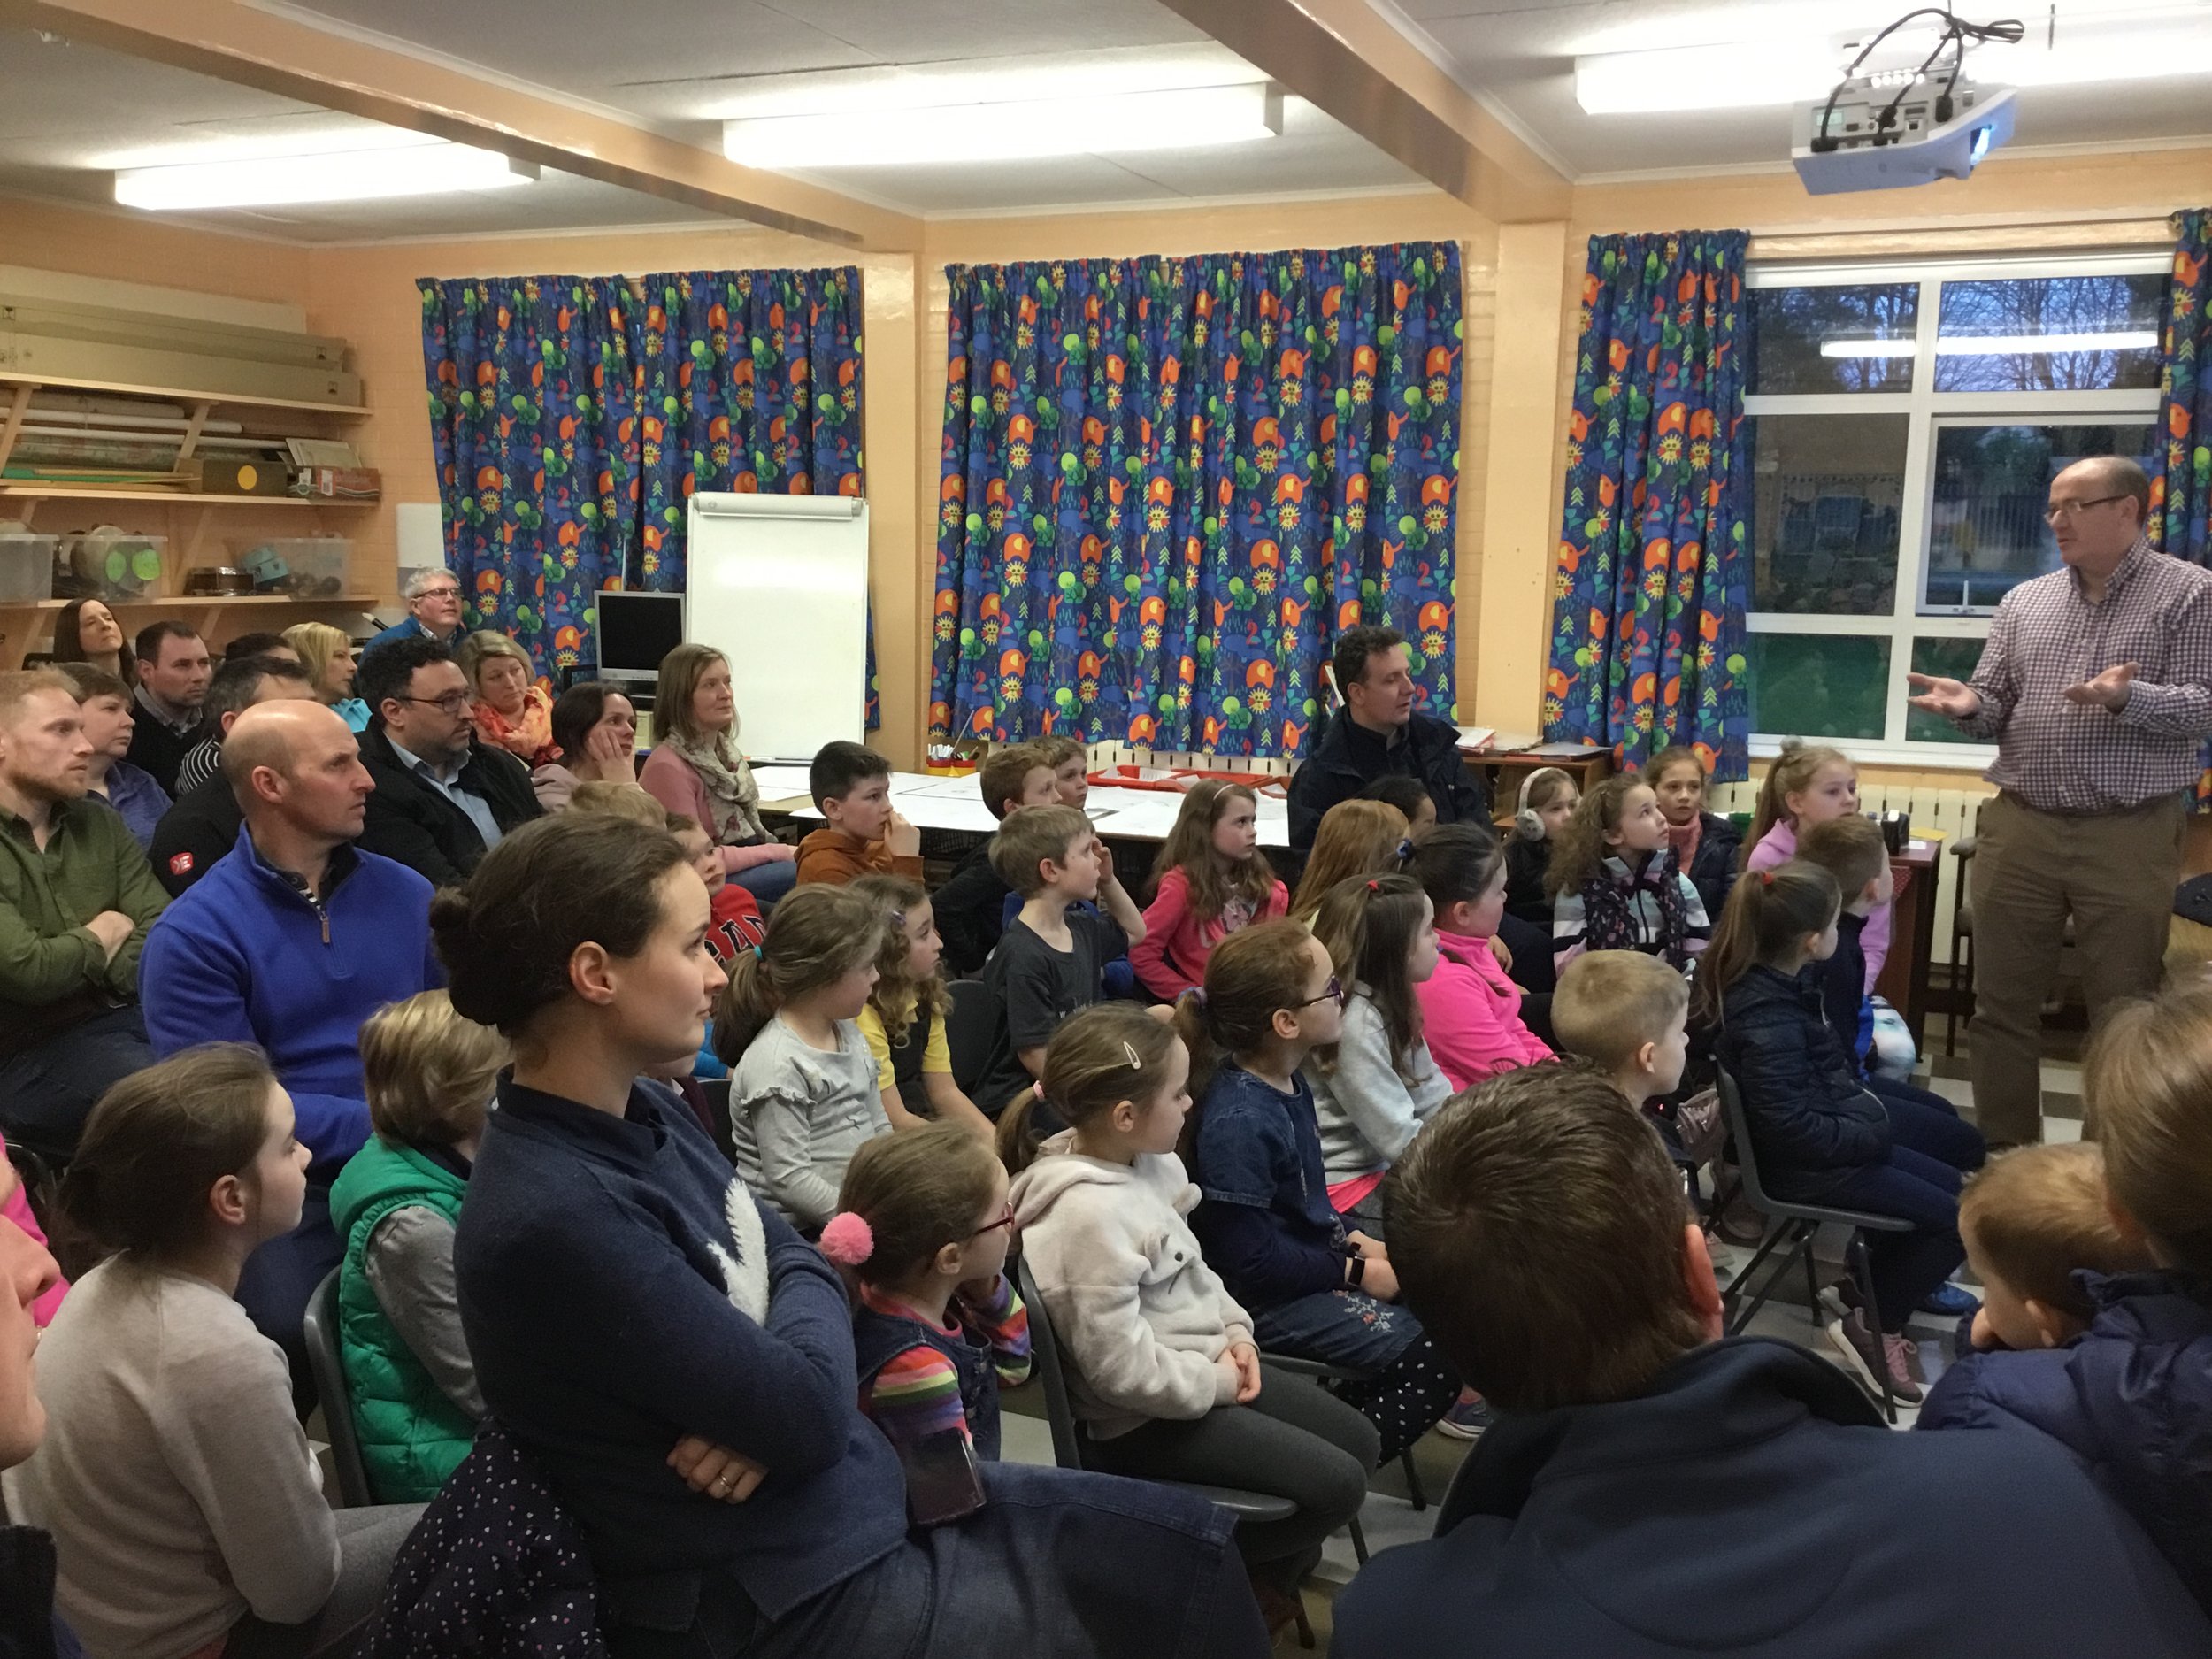 Parents and children enjoying the presentation by Mr Hasson.